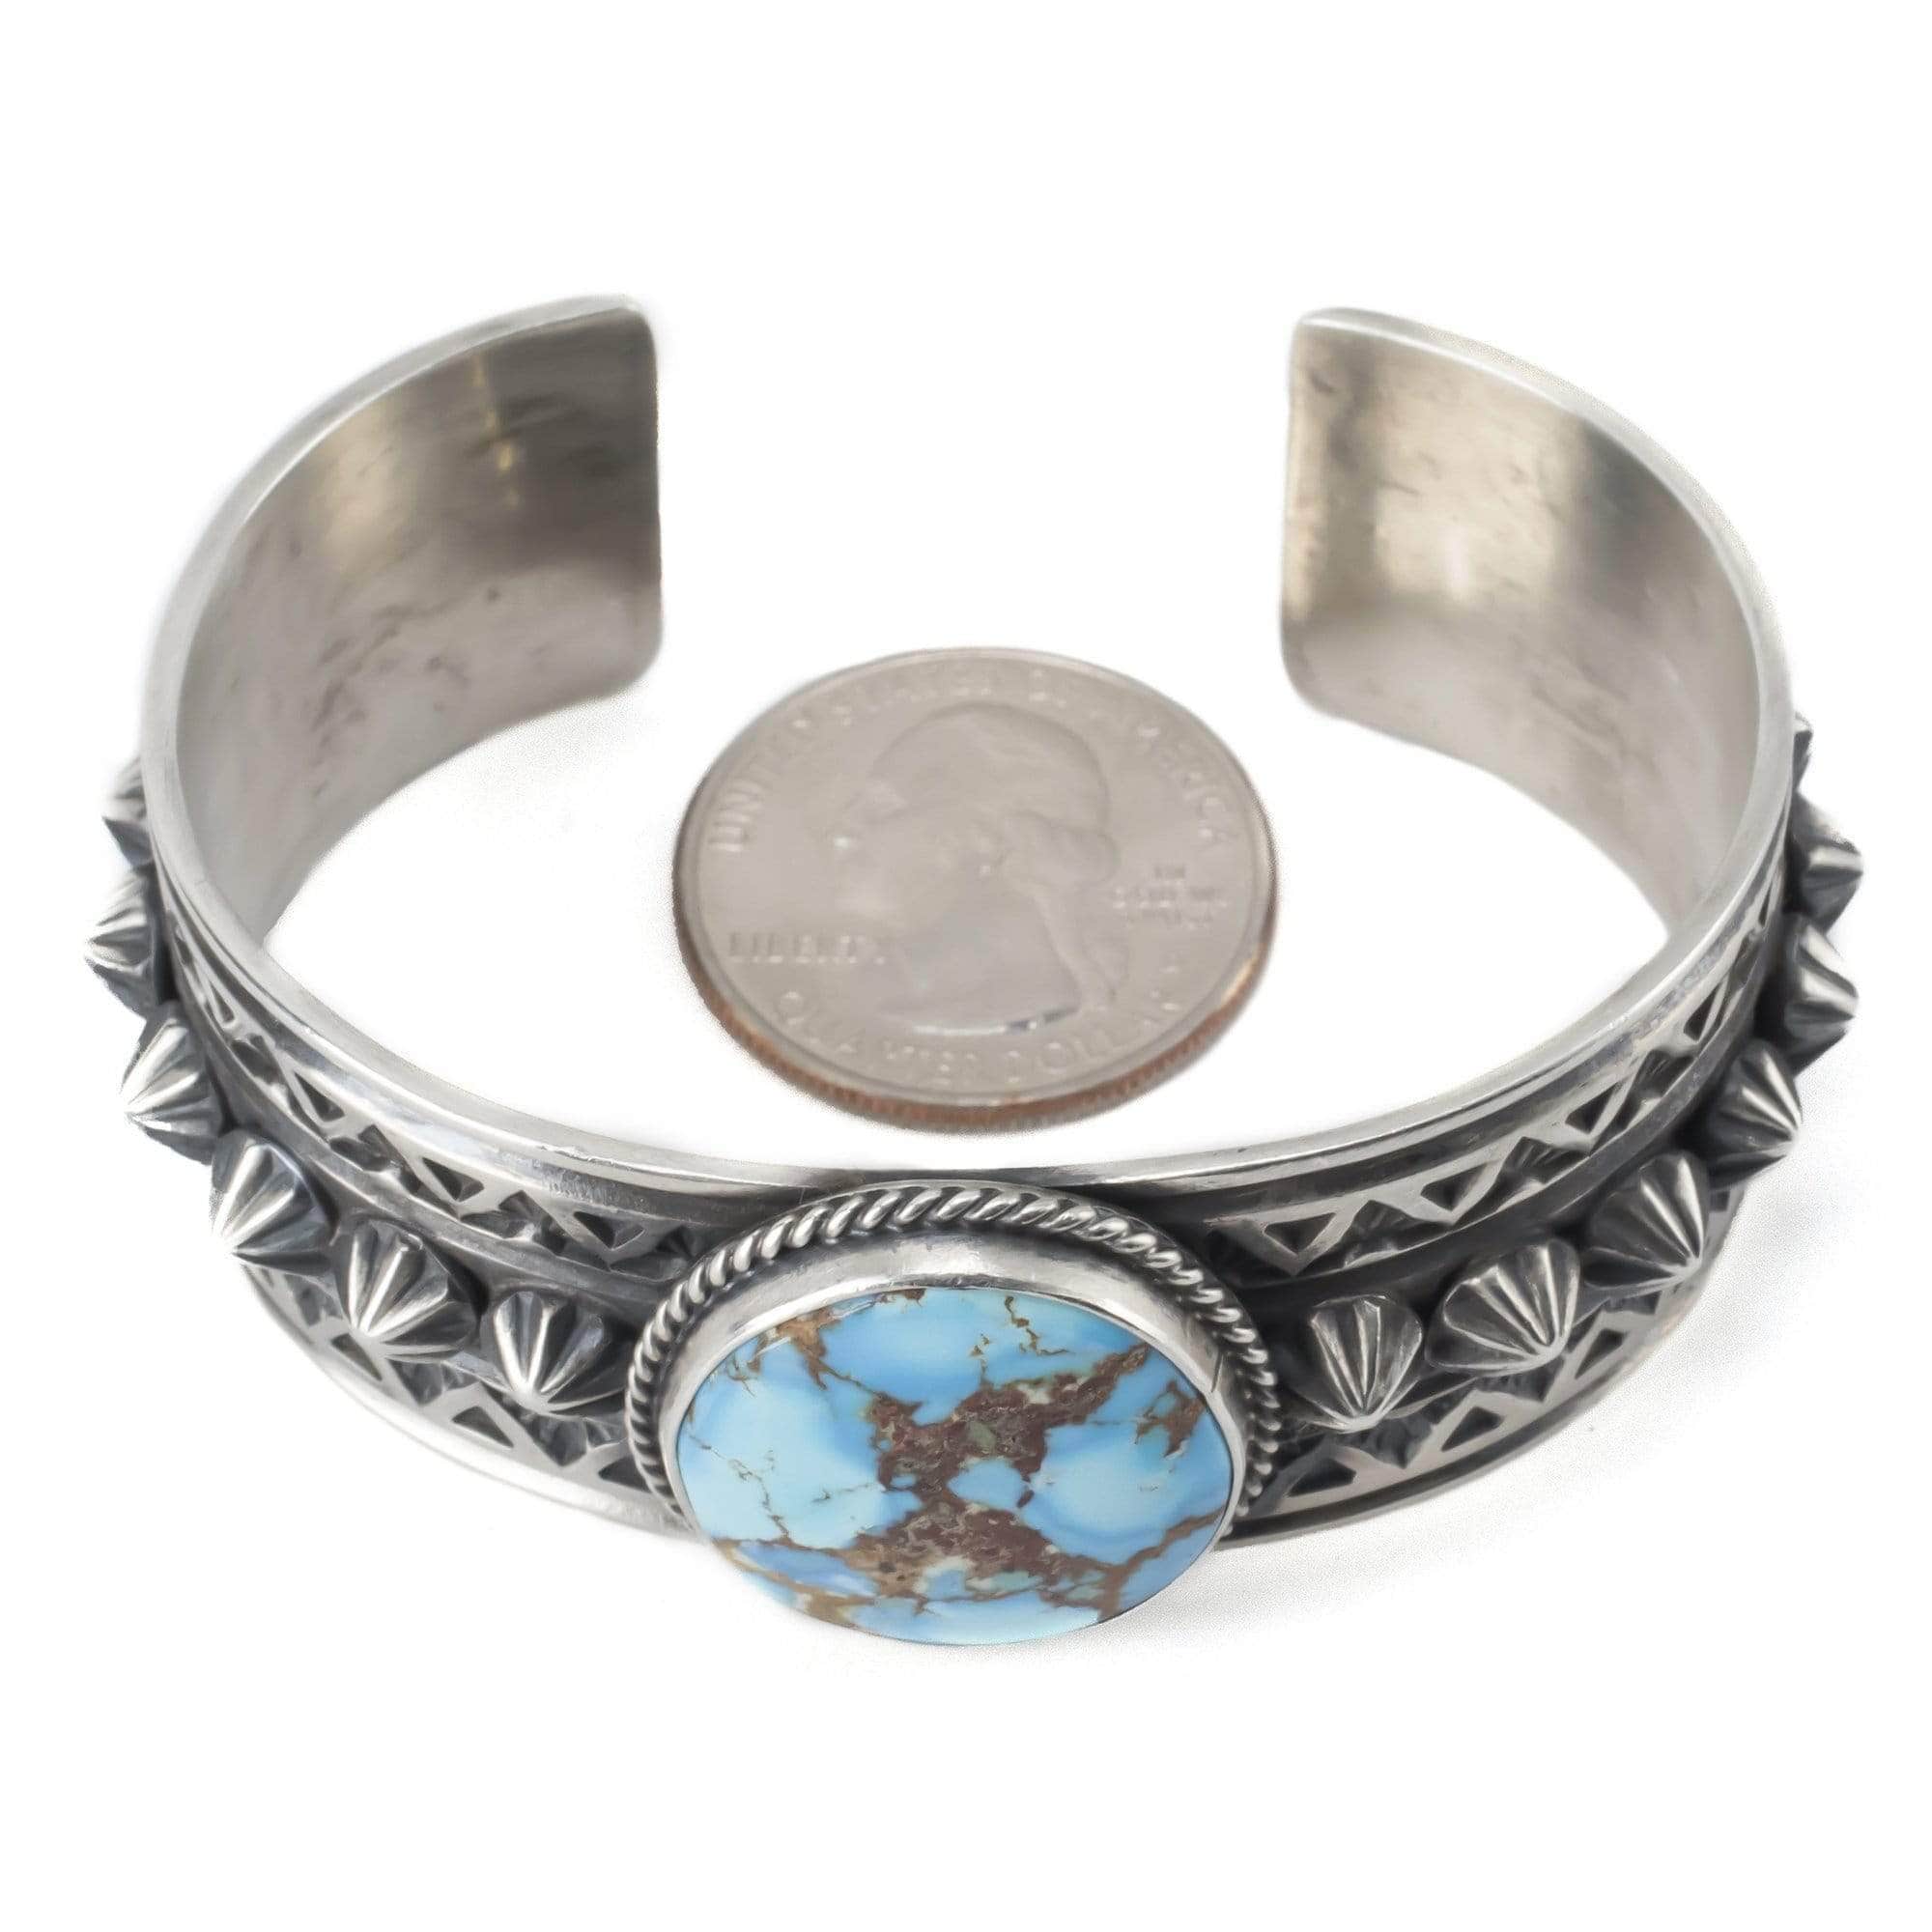 Kalifano Native American Jewelry Donovan Cadman Golden Hills Turquoise Native American Made 925 Sterling Silver Cuff NAB2700.001